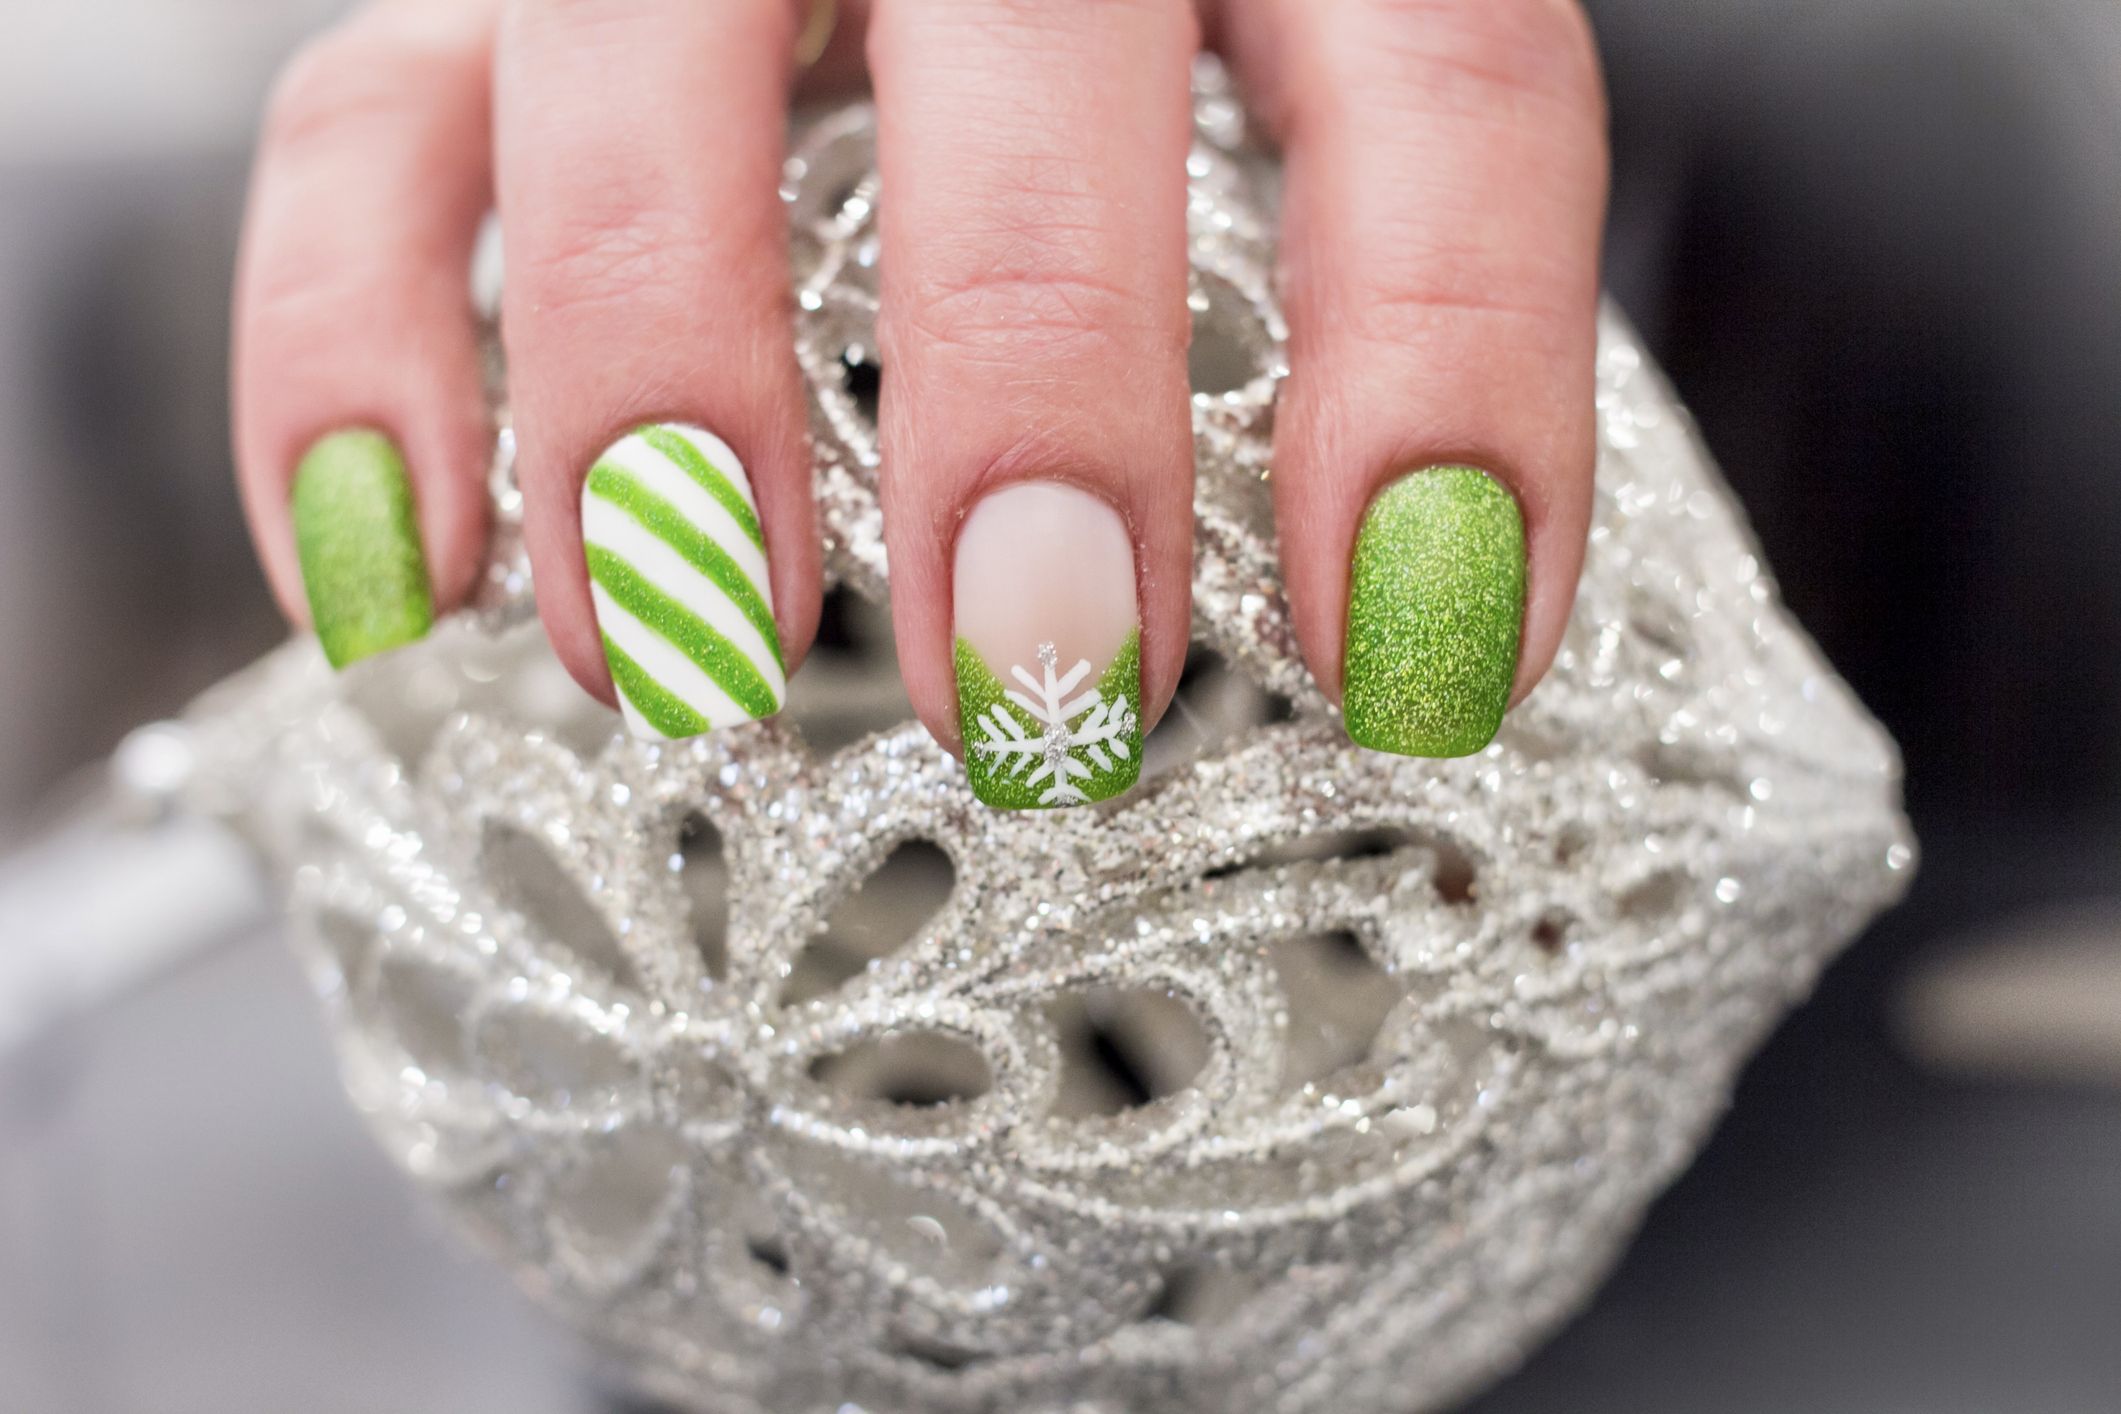 5. Red and Green Gel Nail Art - wide 1